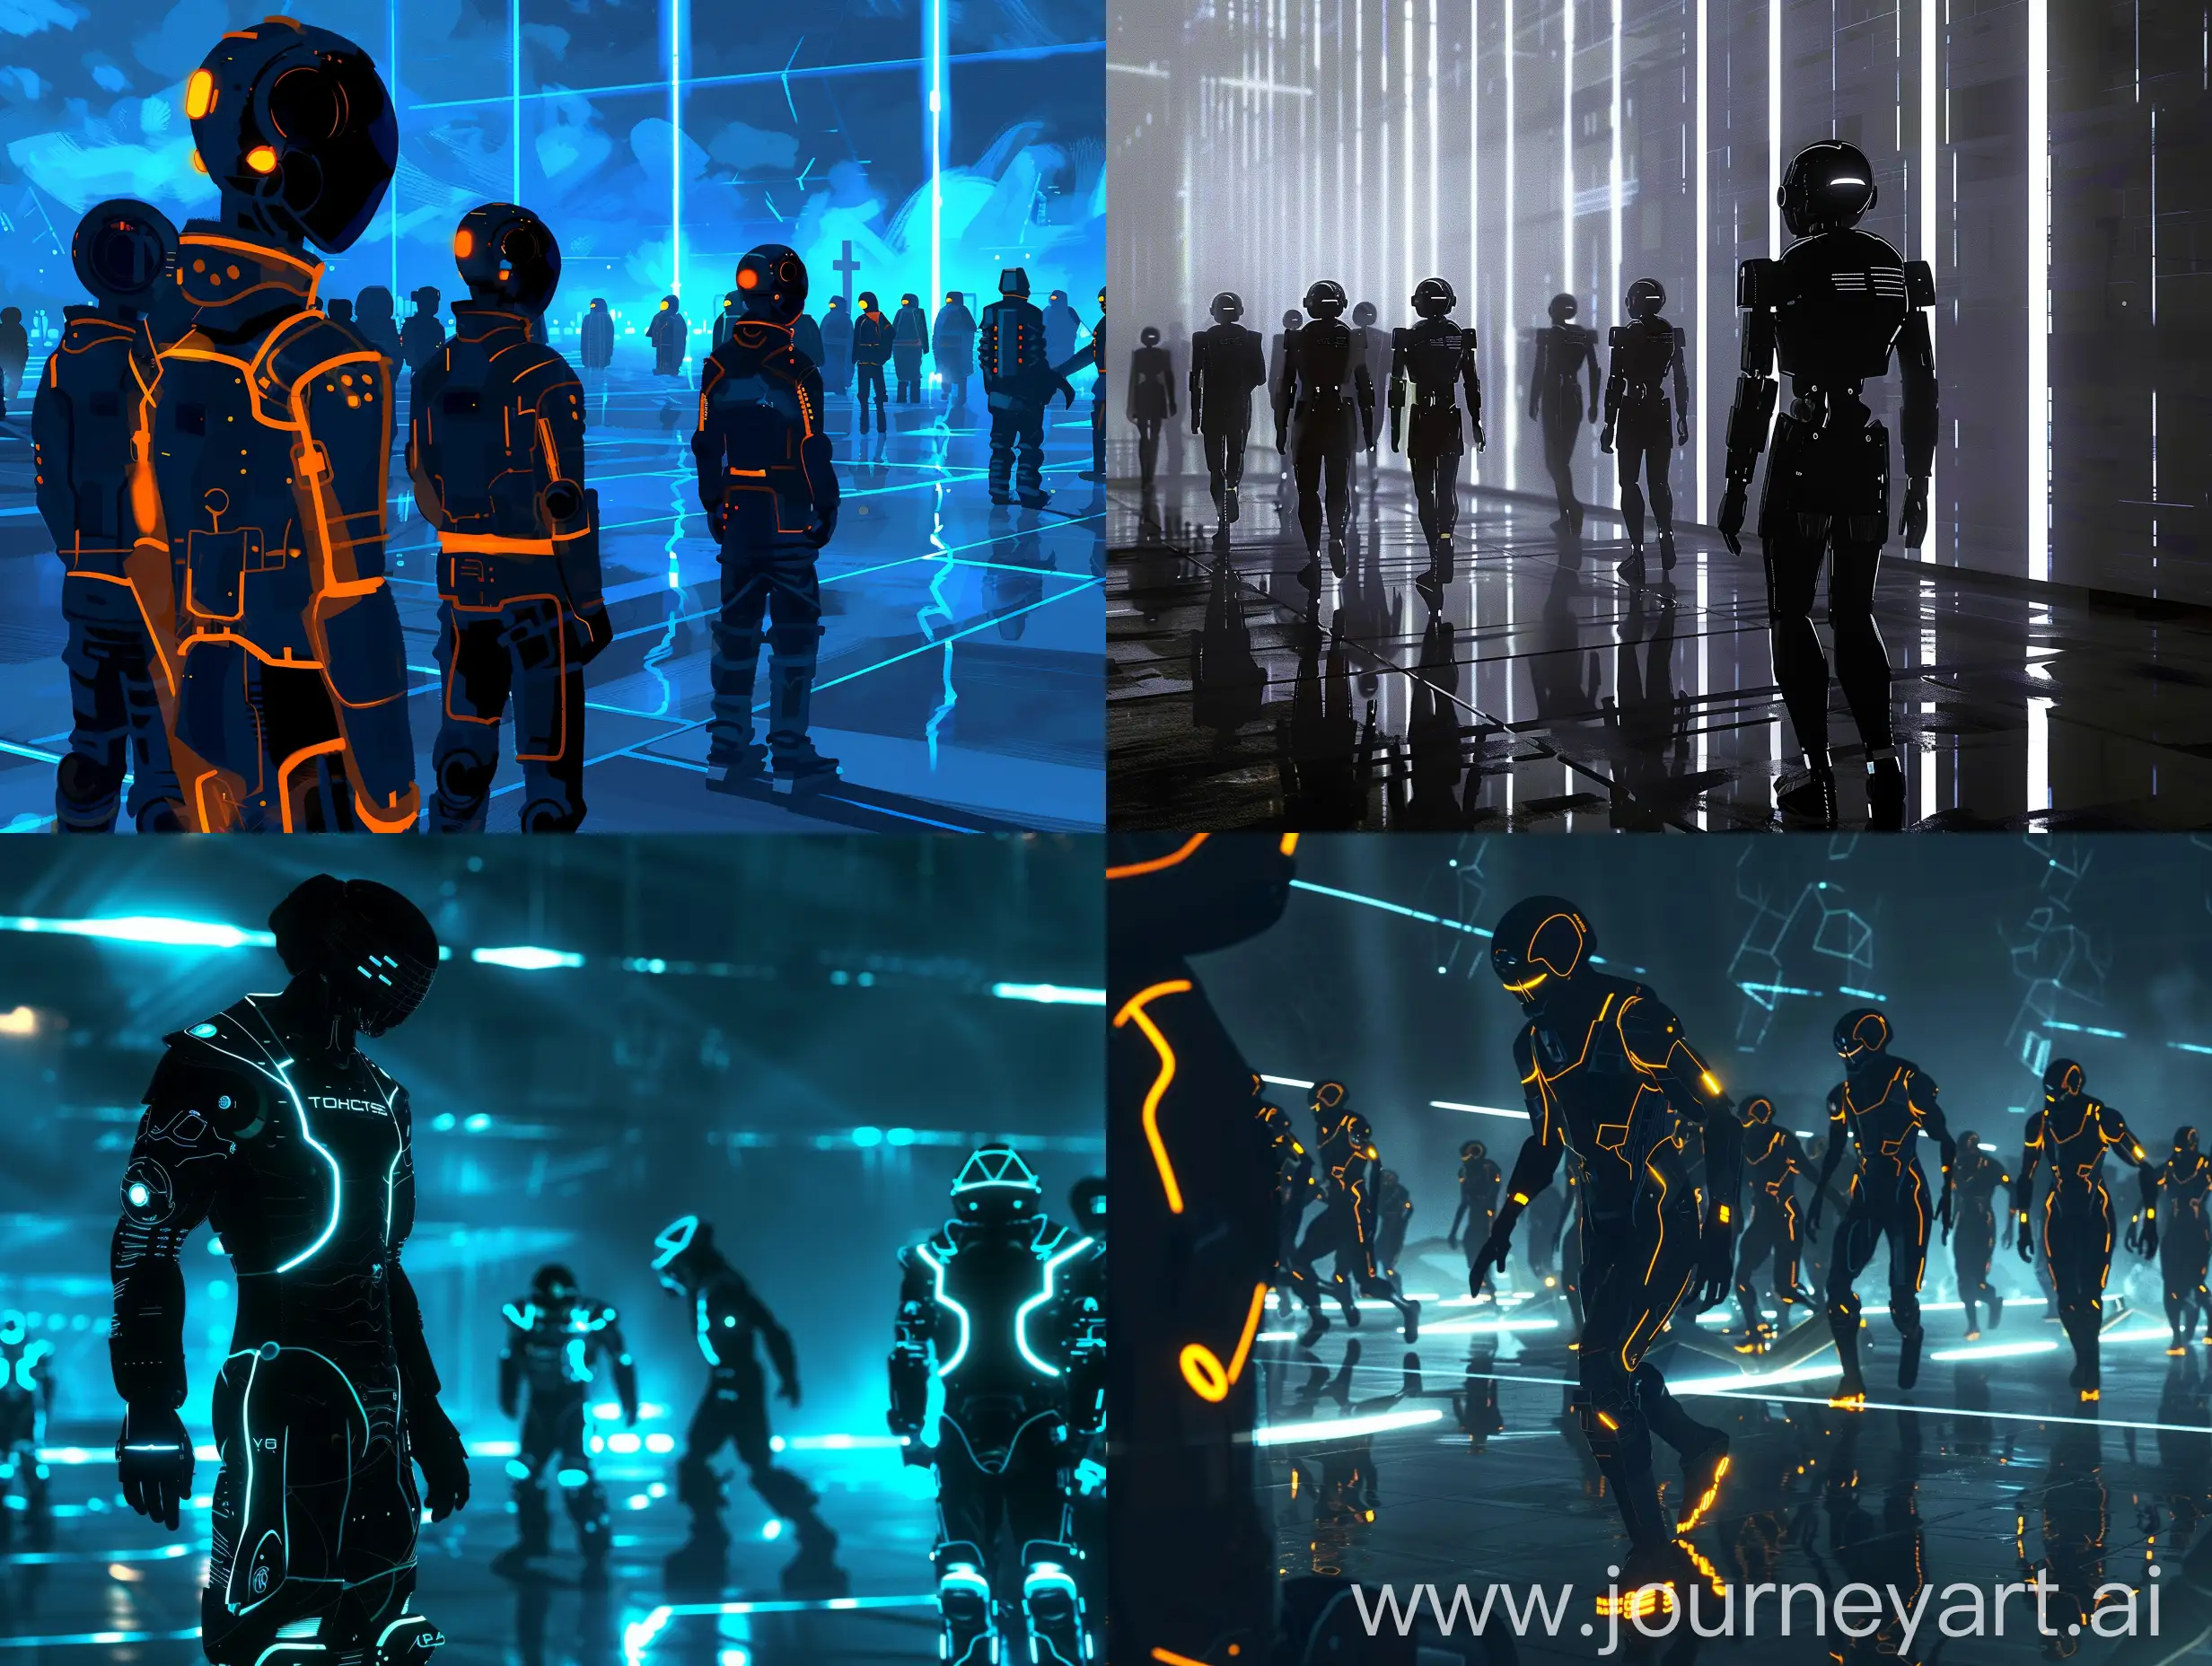 Futuristic-Cyberpunk-Scene-with-Tron-Legacy-Style-People-and-Robots